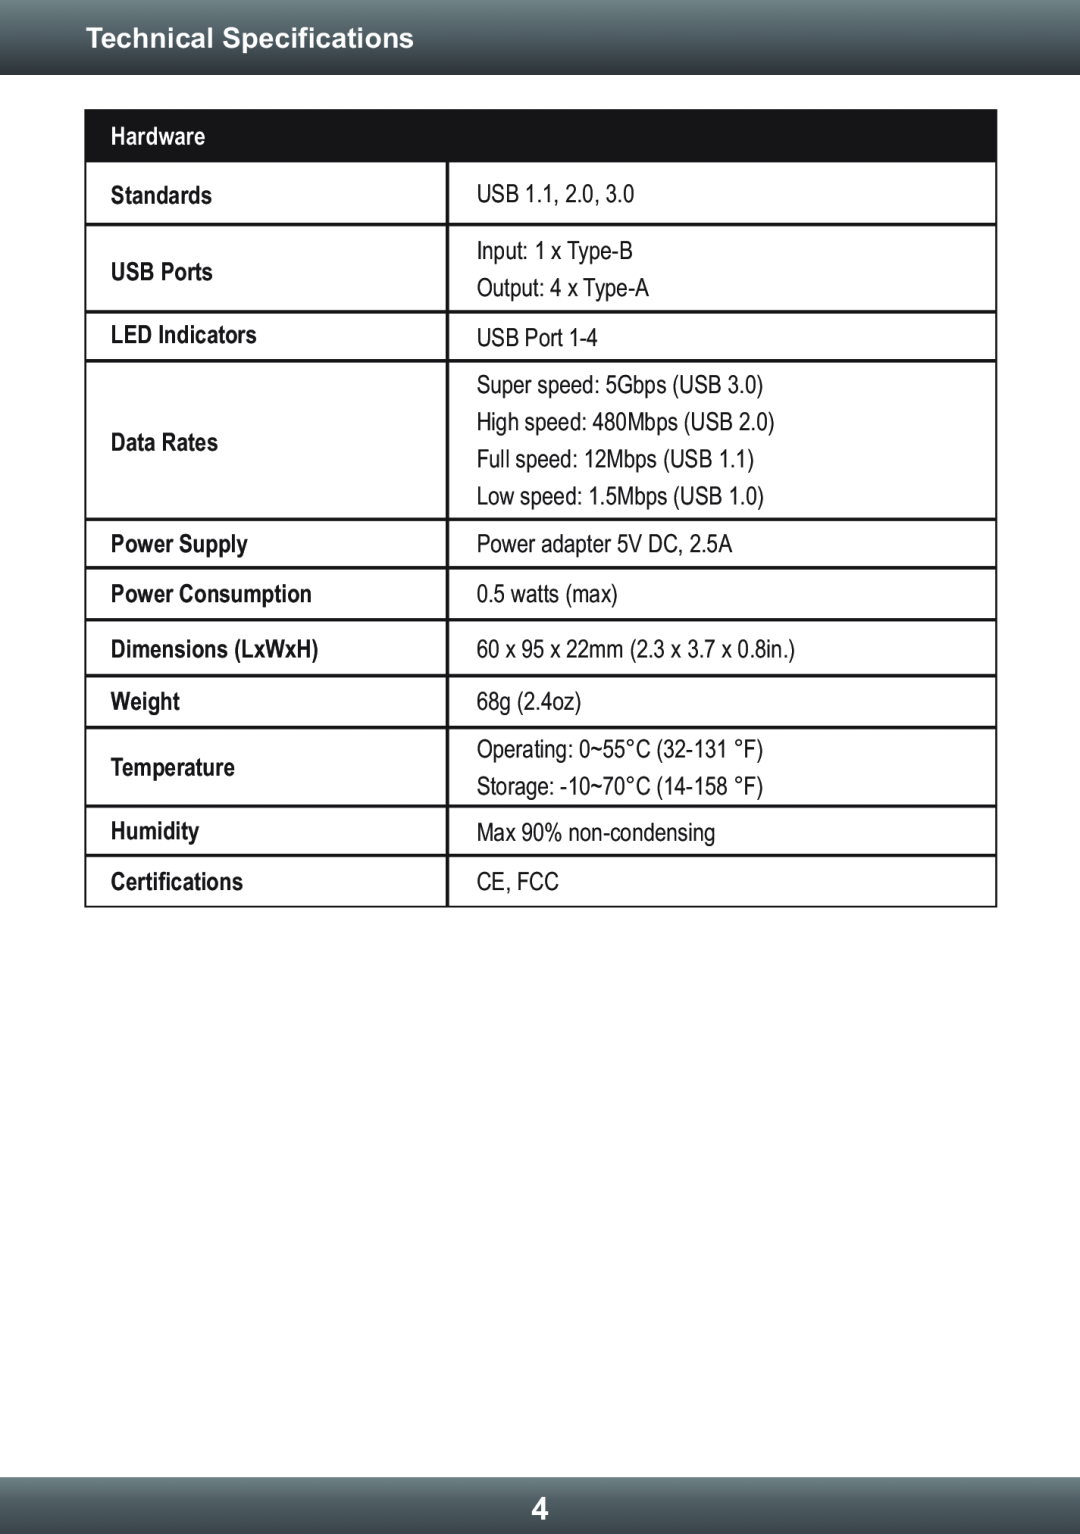 TRENDnet TU3H4 manual Technical Specifications, Hardware 